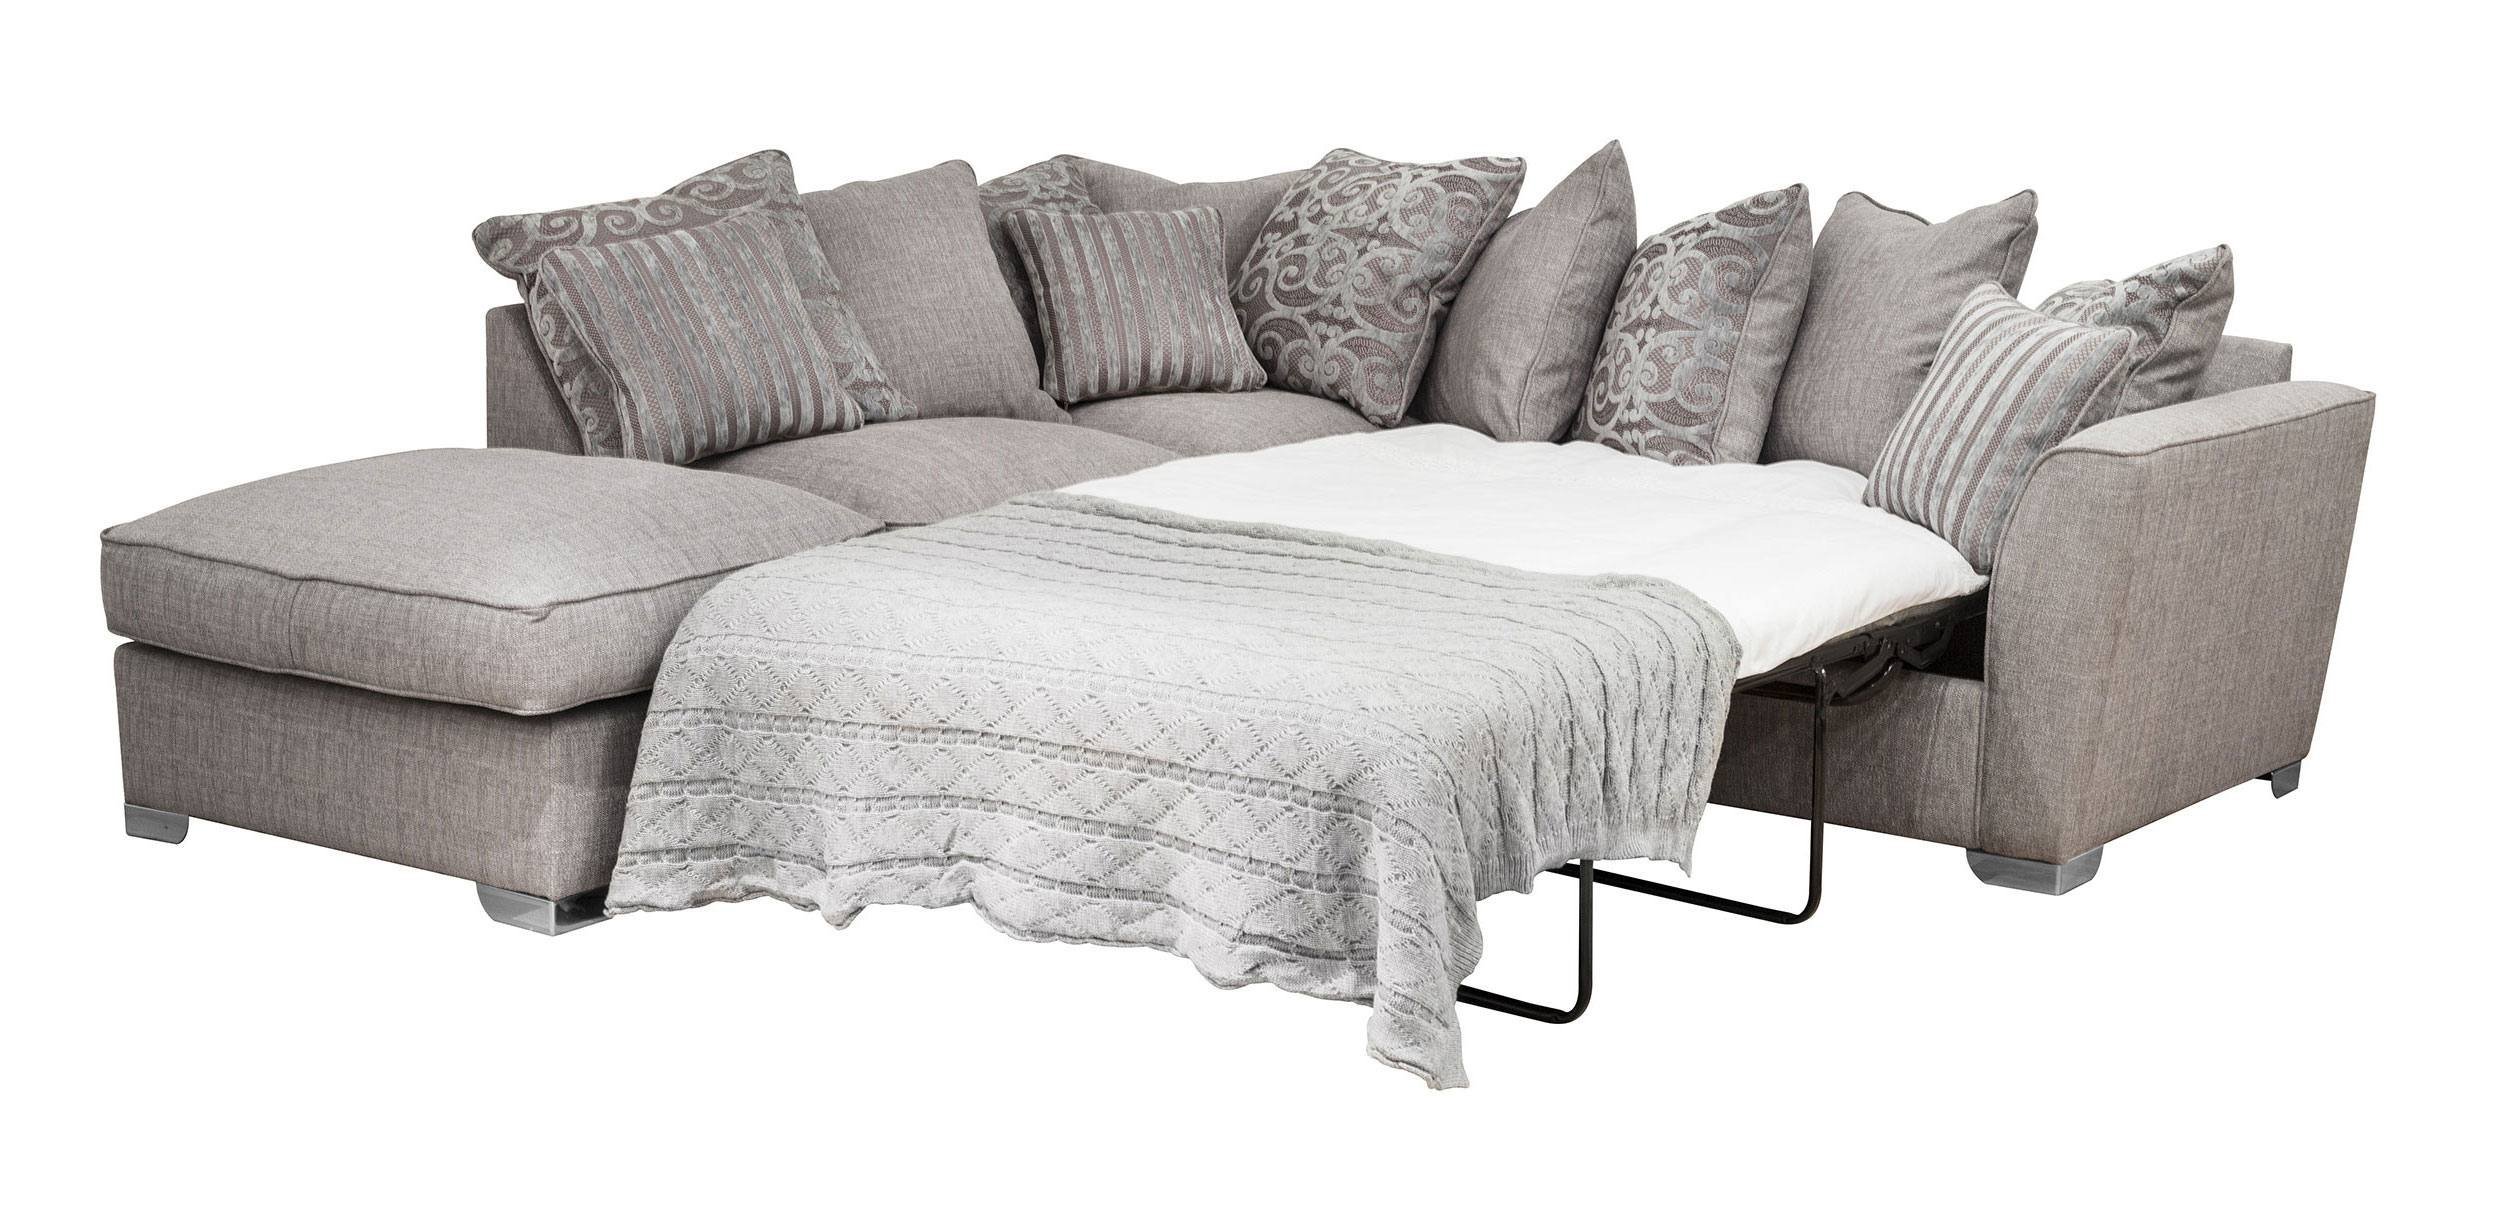 corner sofa bed uk next day delivery